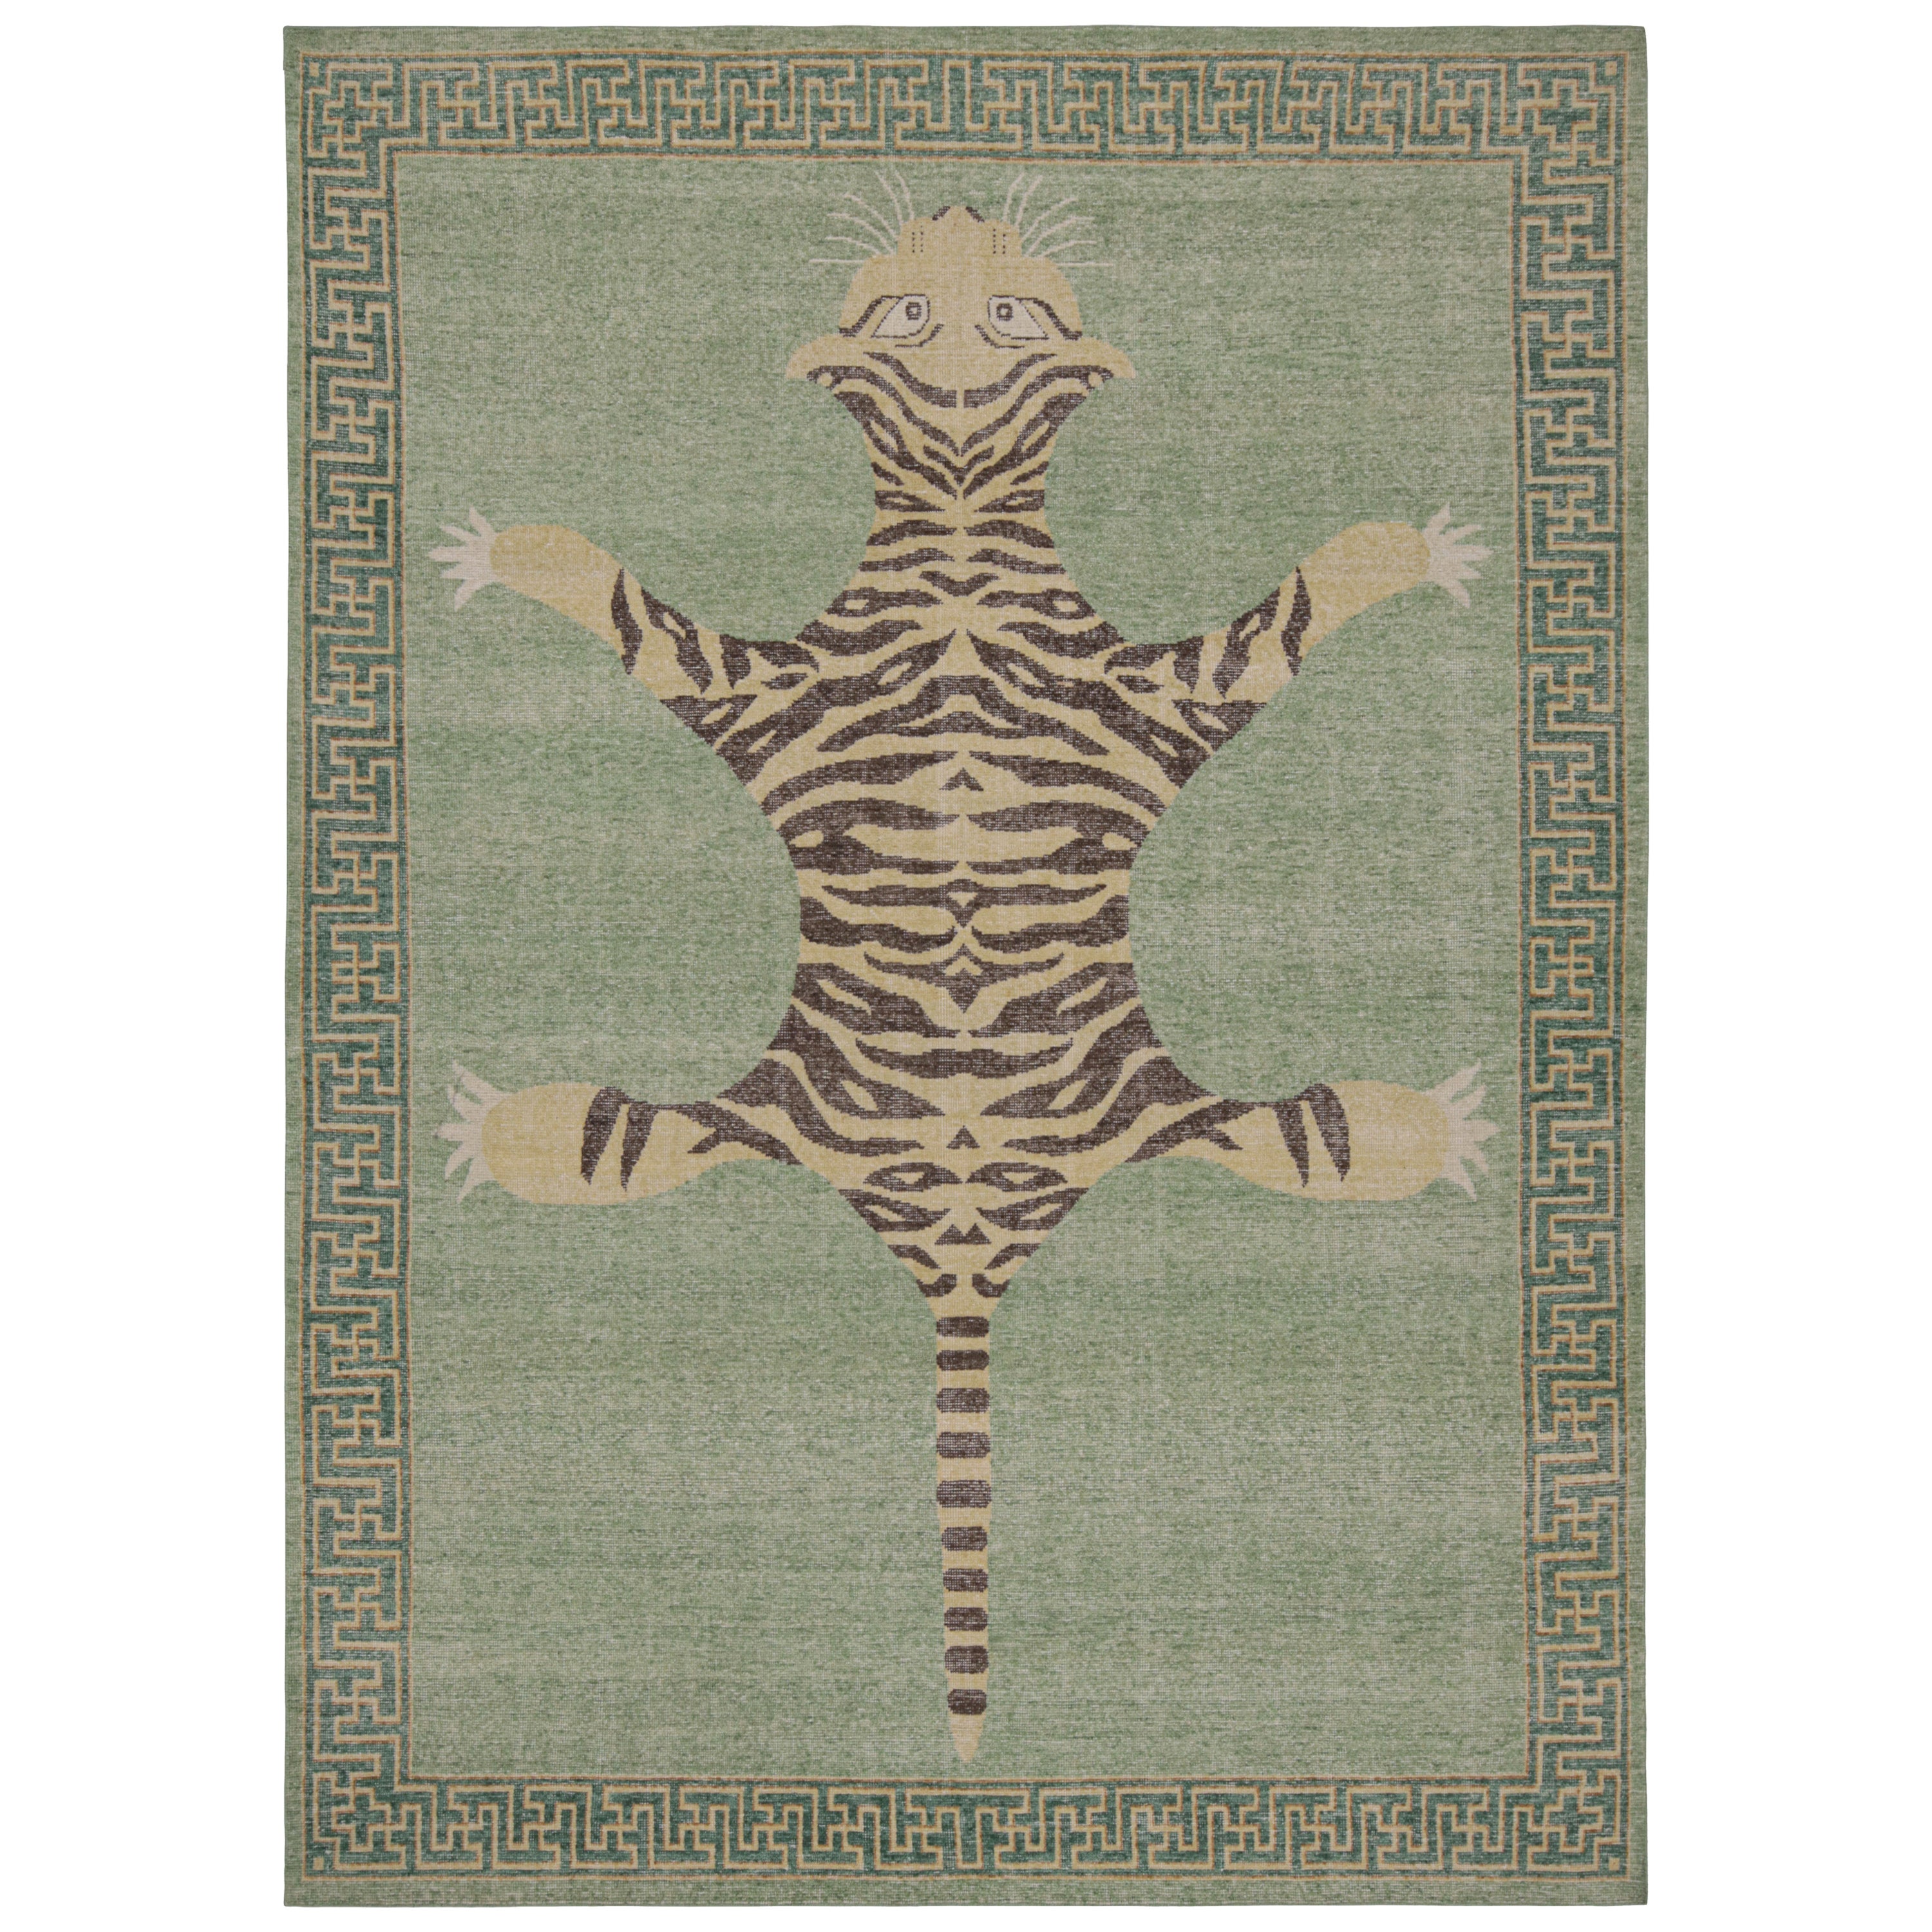 Rug & Kilim’s Modern Tiger Skin Pictorial Rug in Green, Beige and Brown For Sale